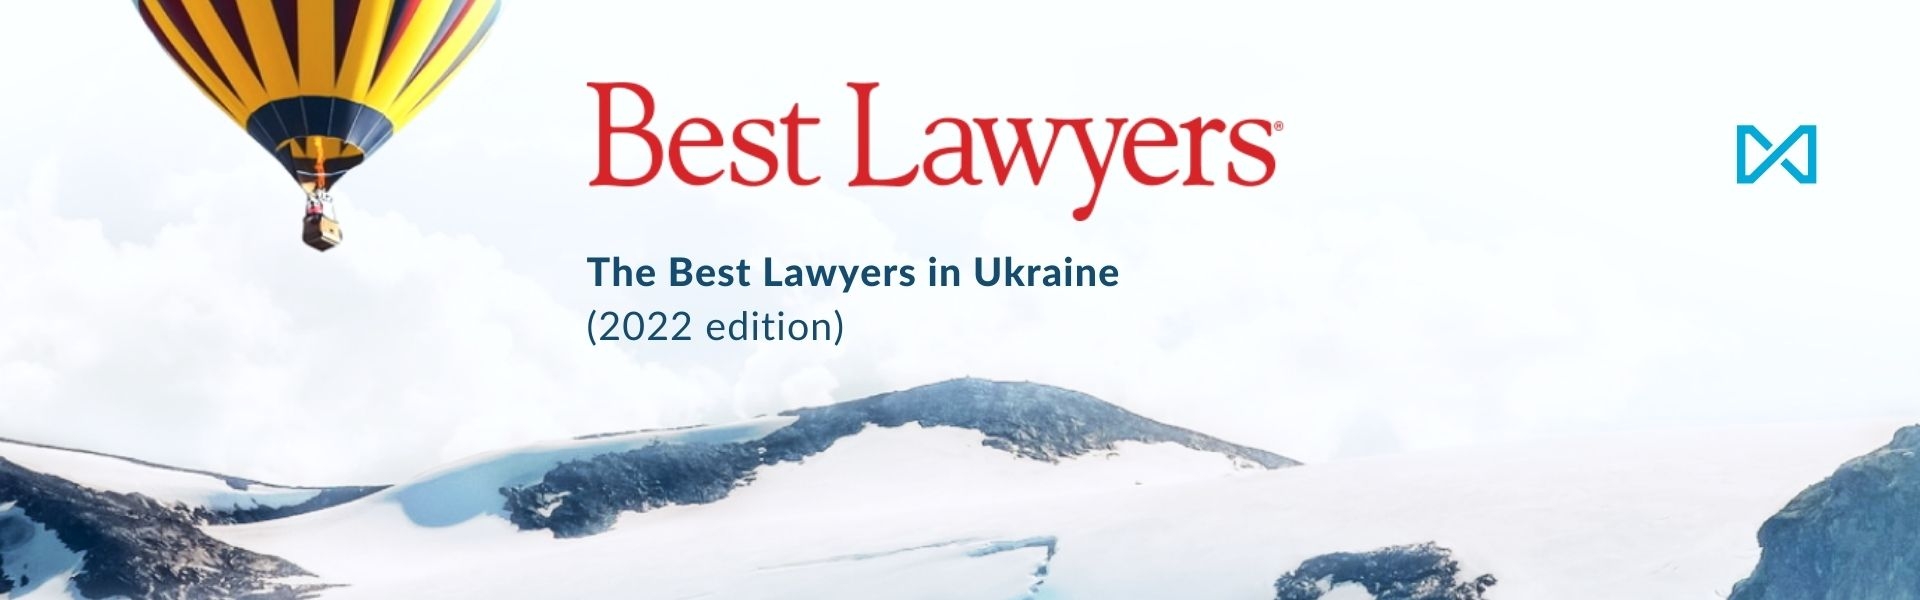 EVERLEGAL is ranked by The Best Lawyers in Ukraine 2022